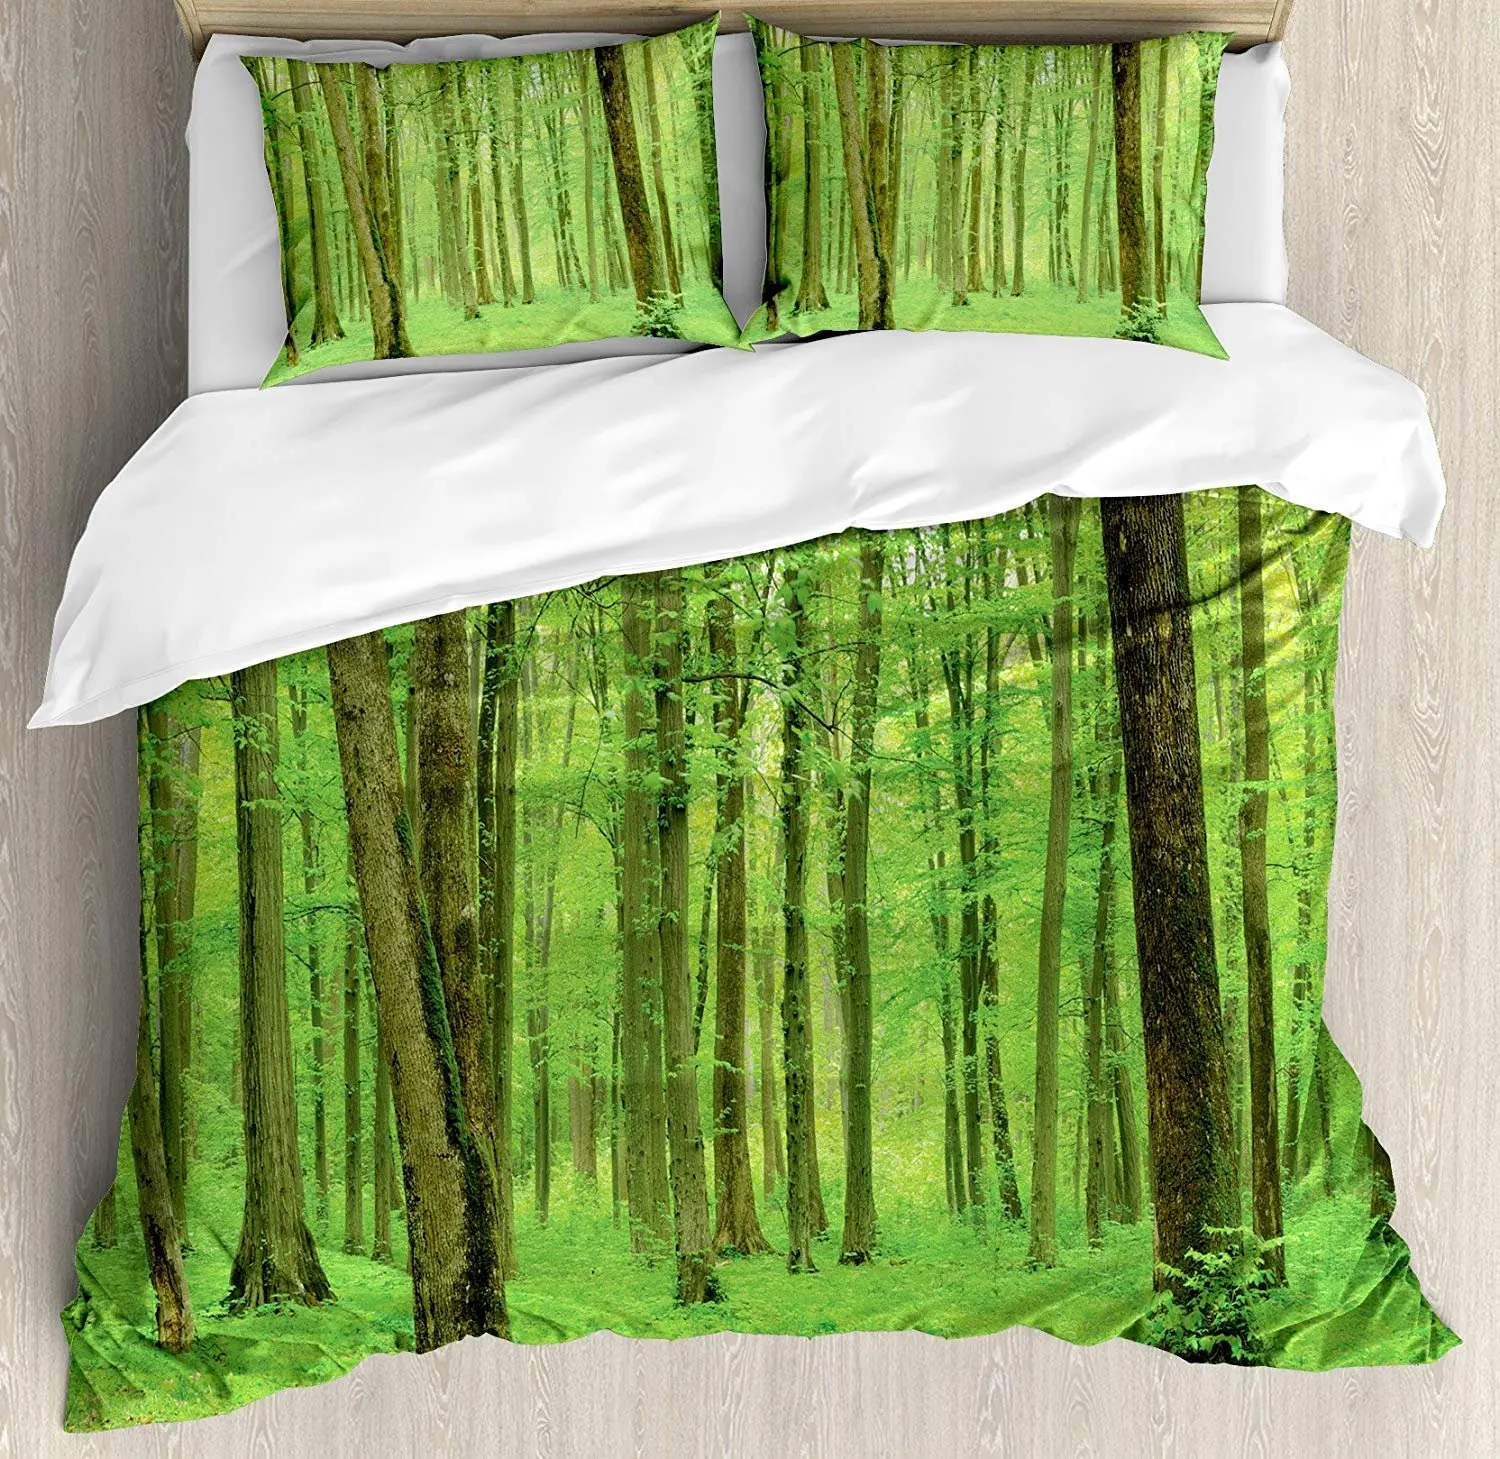 

Forest Bedding Set Spring Forest in a Sunny Day Fresh Soft Colors Like a Dream Leaf Peace Print Duvet Cover Pillowcase For Home